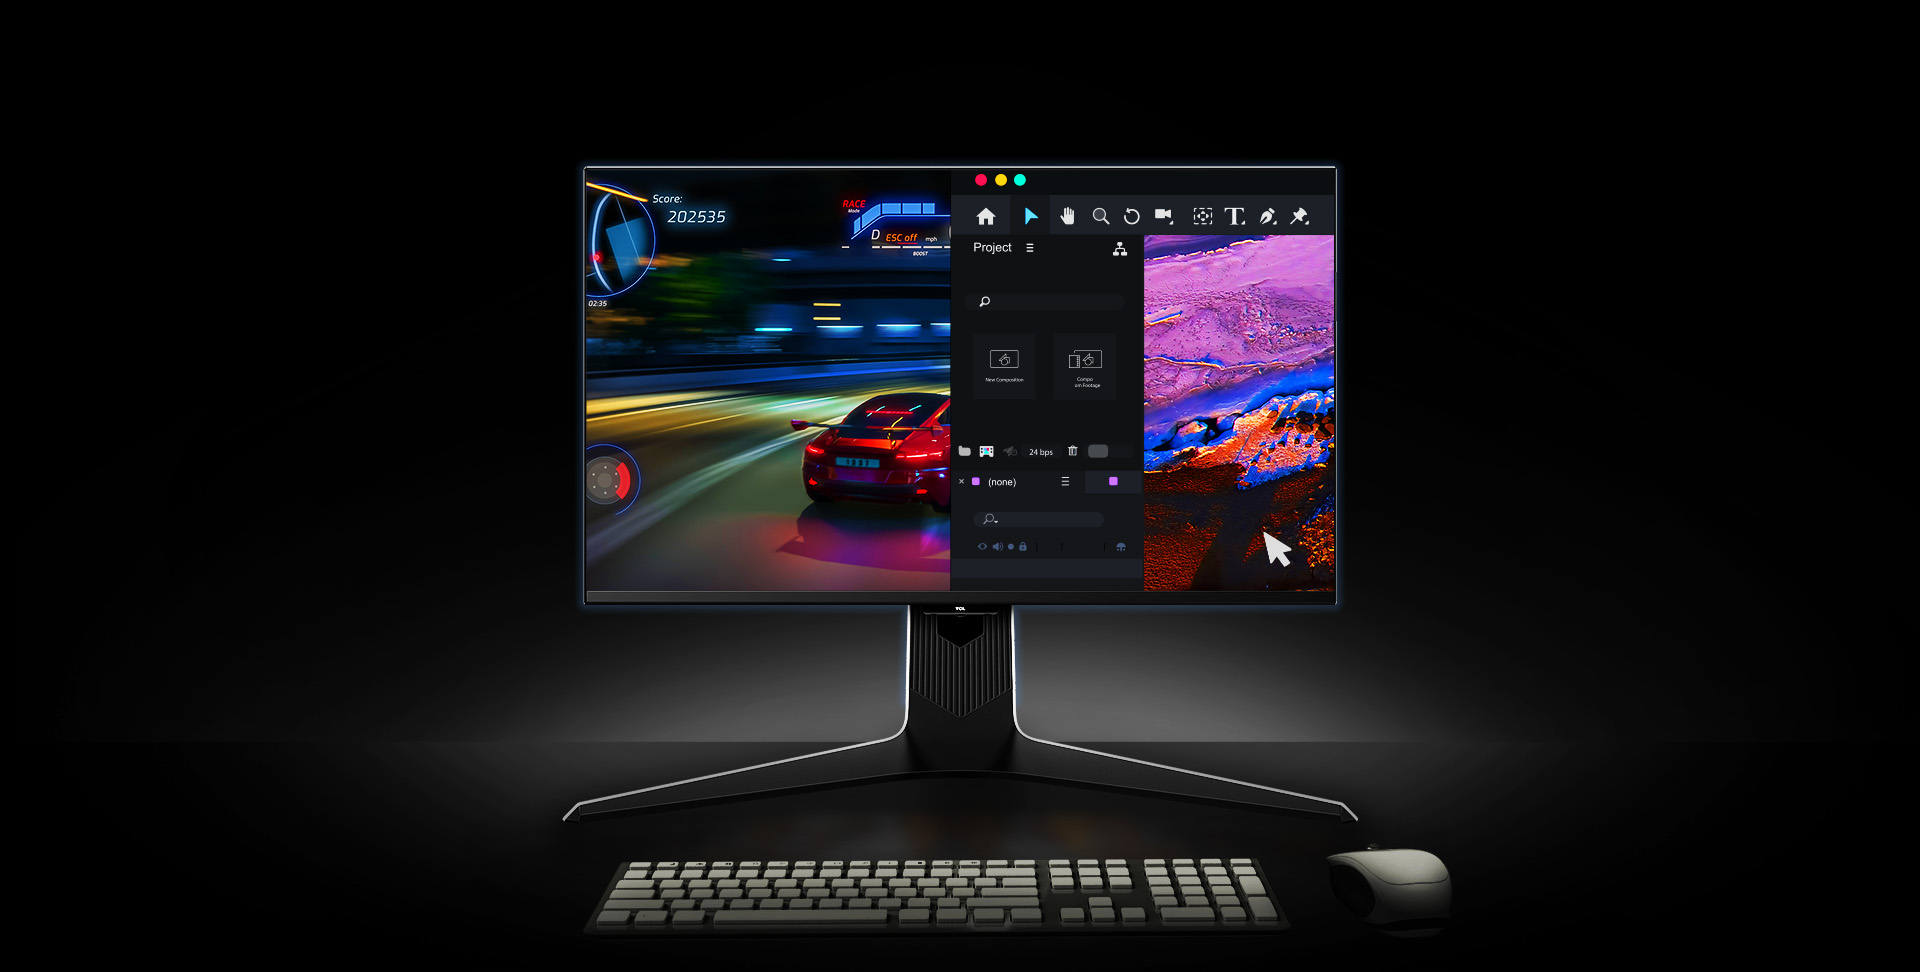 TCL 27R83U Monitor screens from multiple tasks